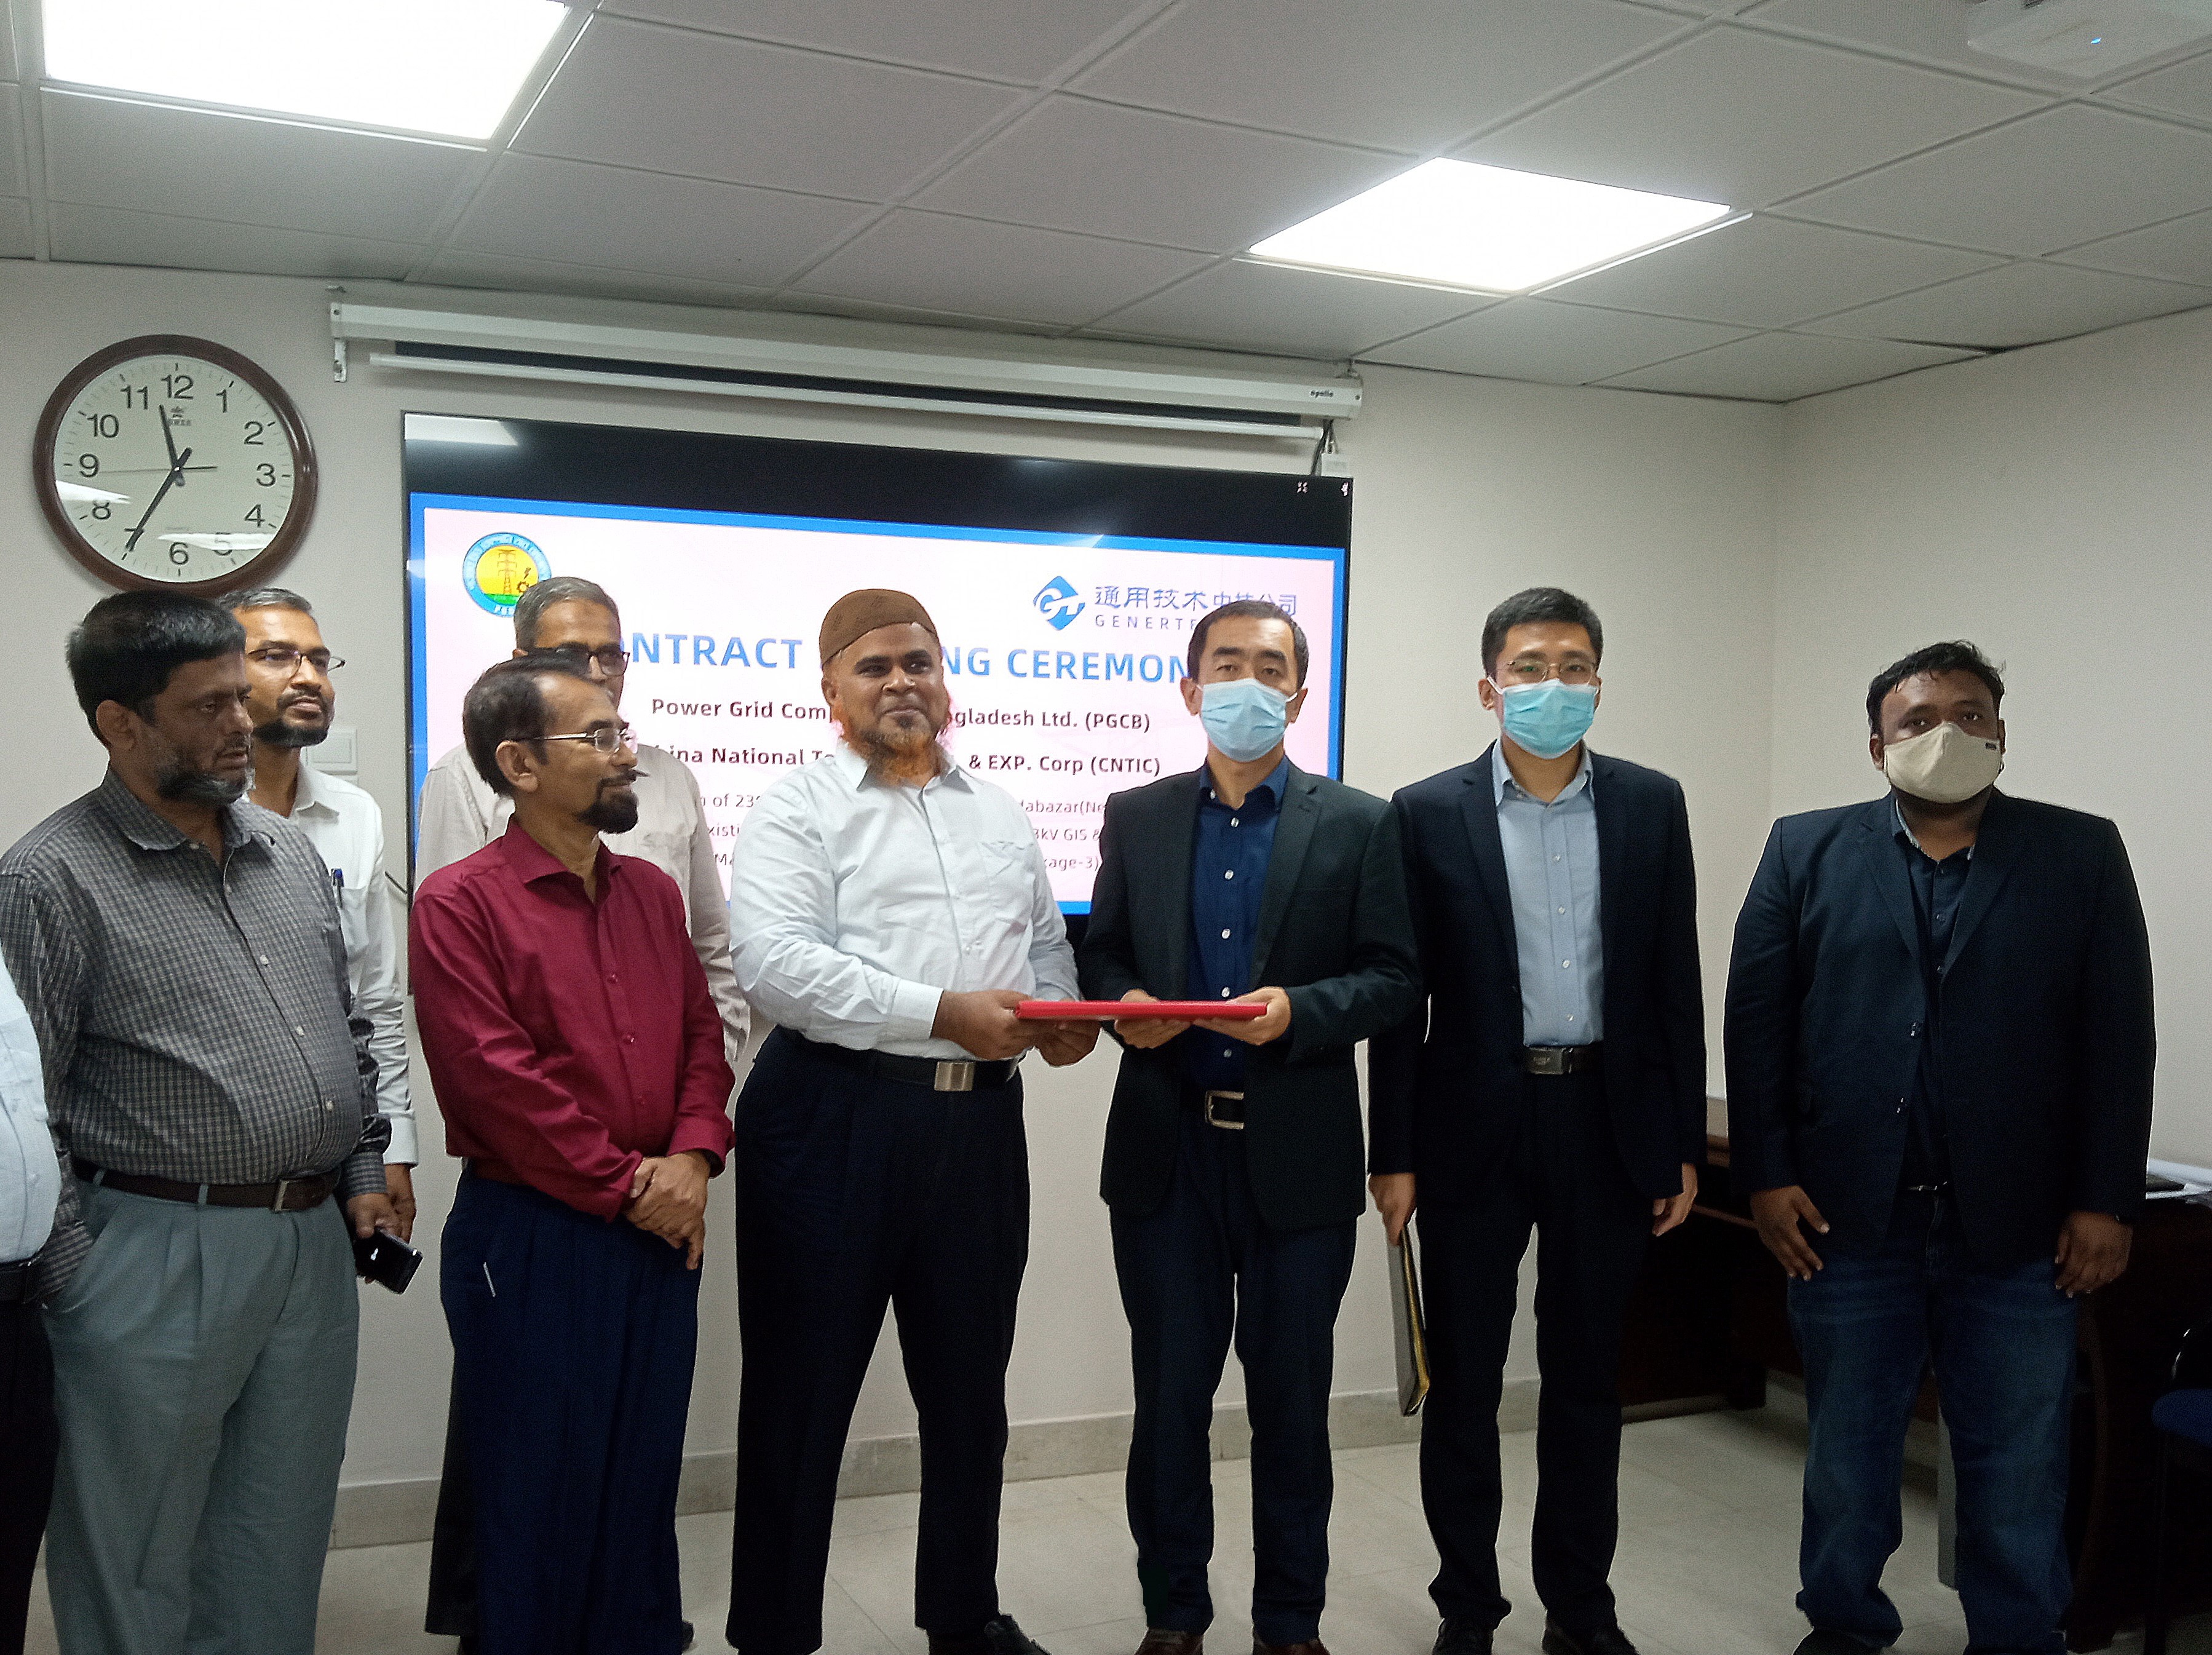 Genertec CNTIC awarded contract for the 3rd tender section of the Chittagong Power Grid Upgrading Project in Bangladesh